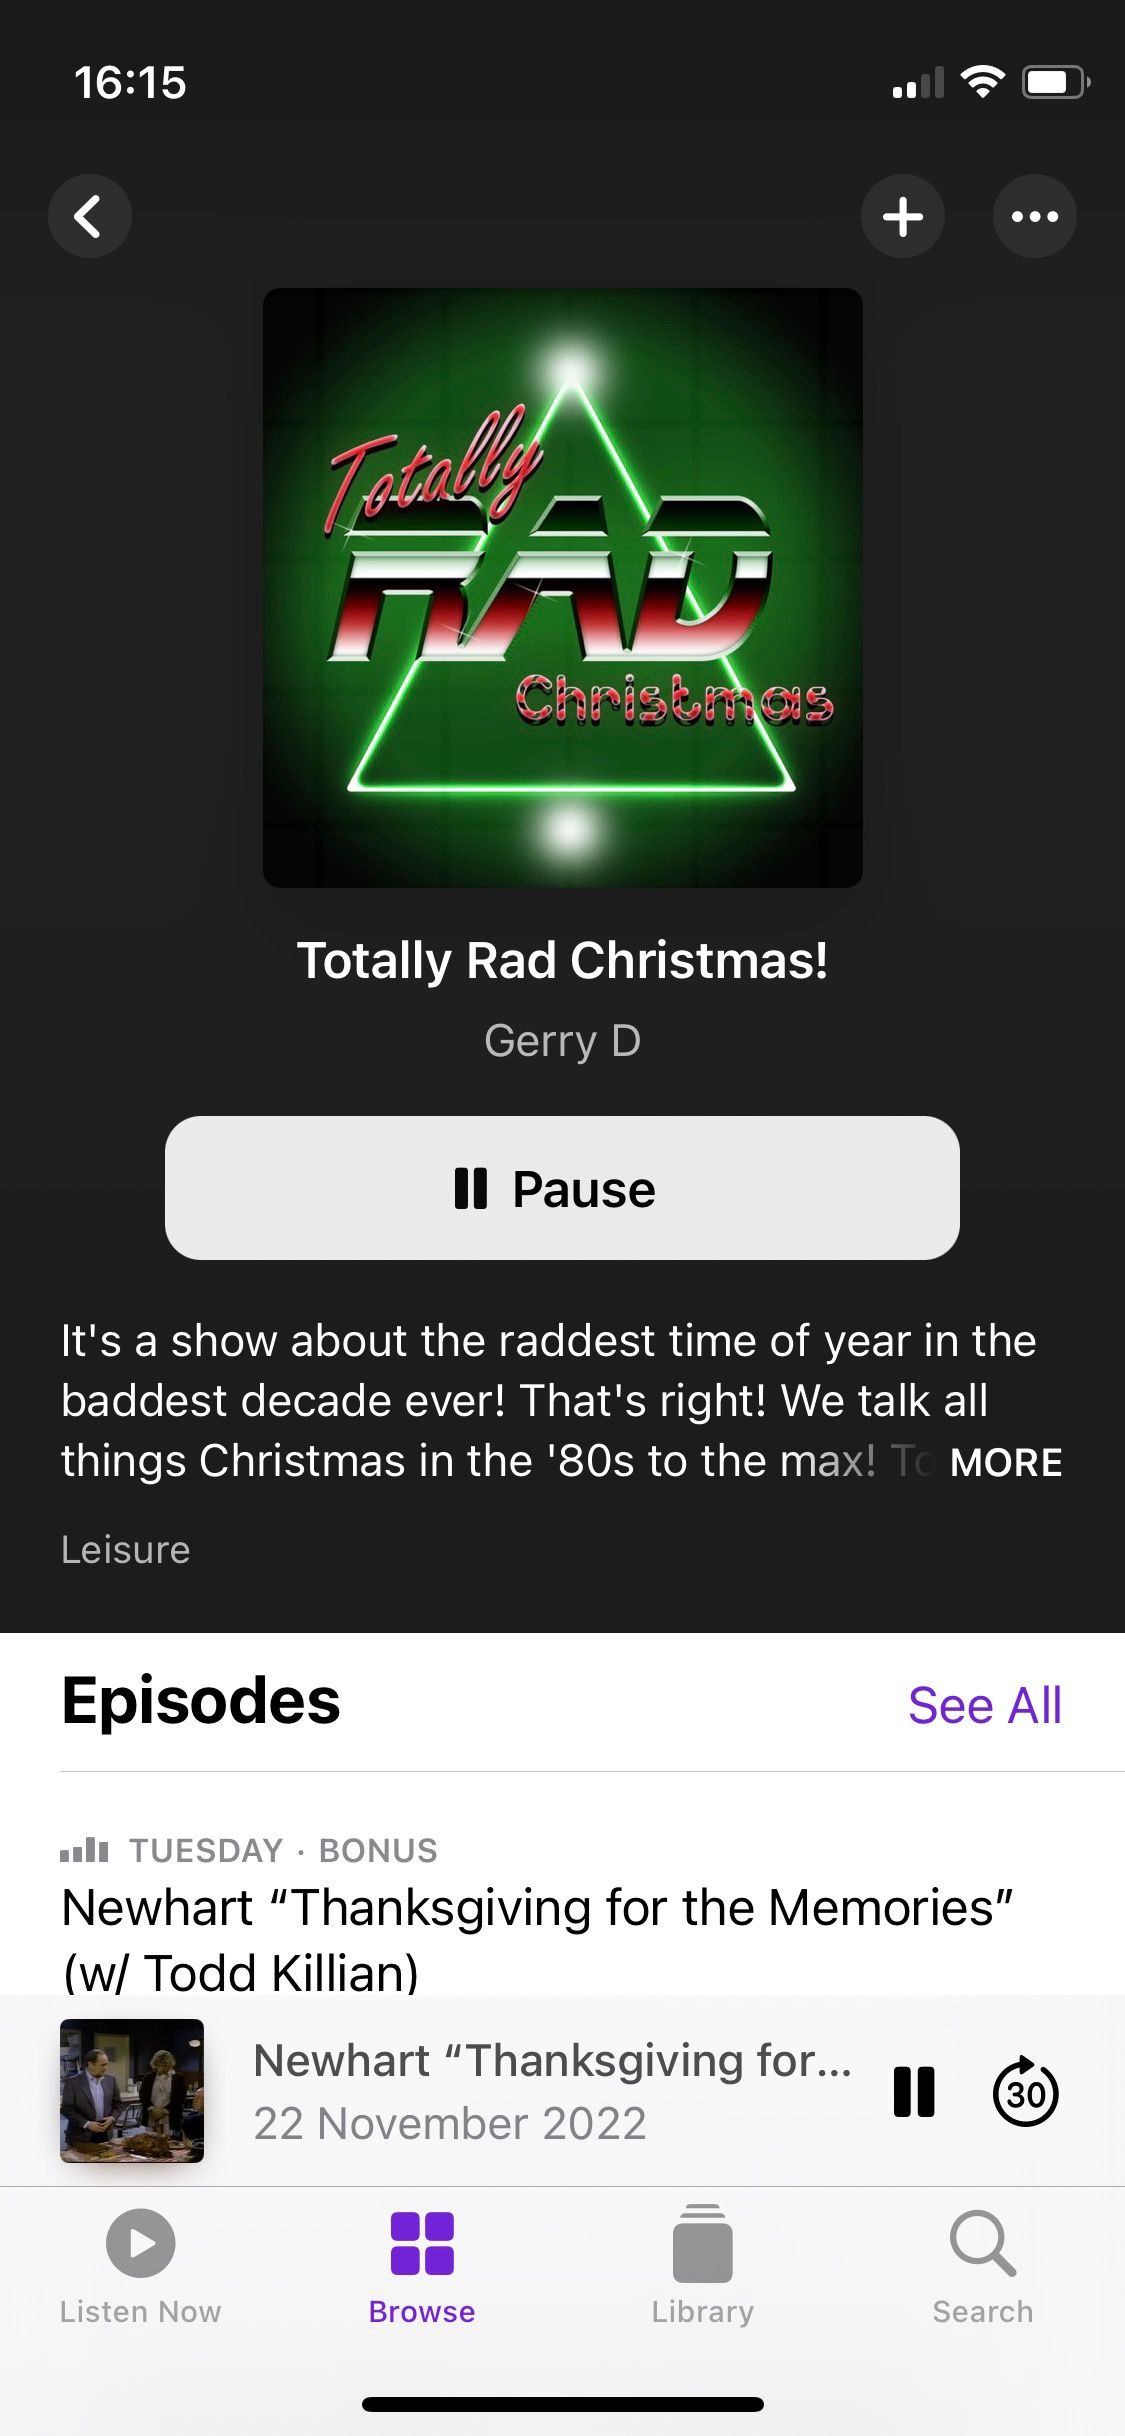 Screenshot of the opening screen of the Totally Rad Christmas podcast